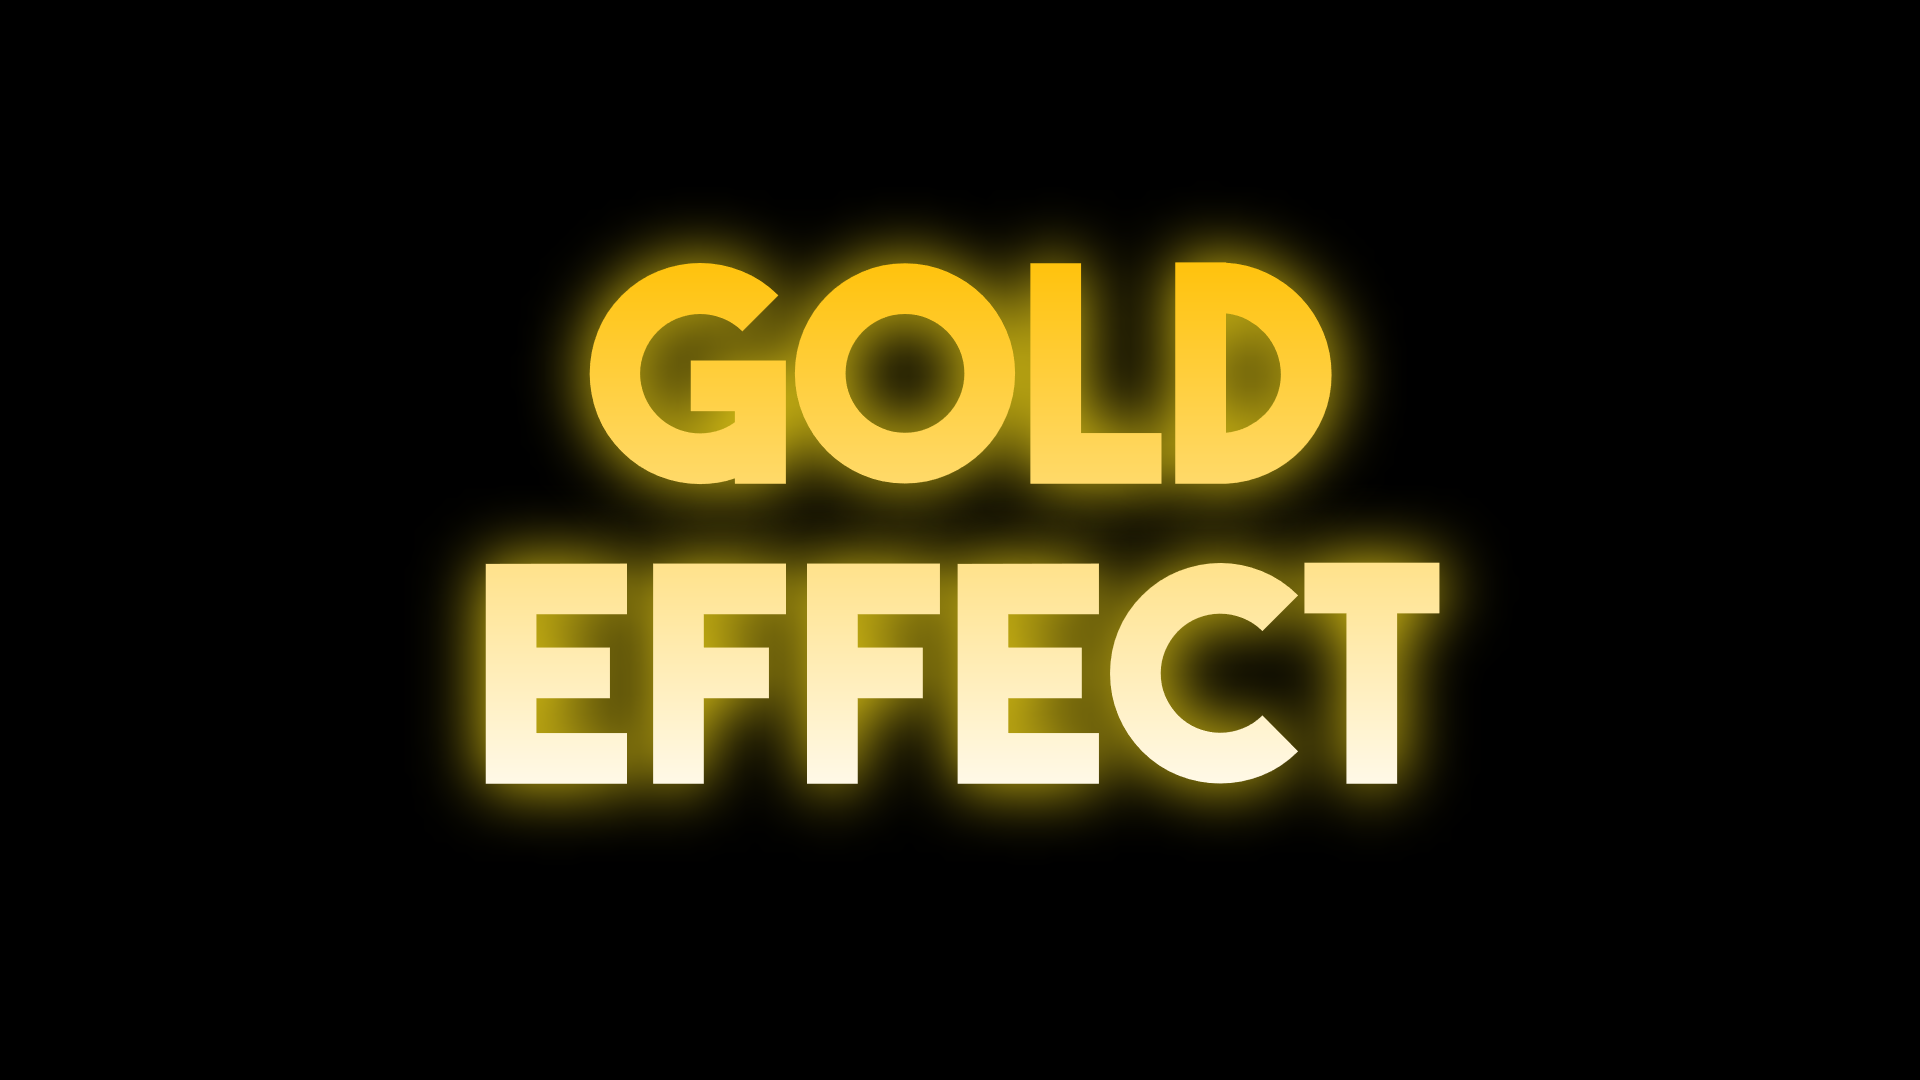 Gold Text Effect Animation Template - #1578619